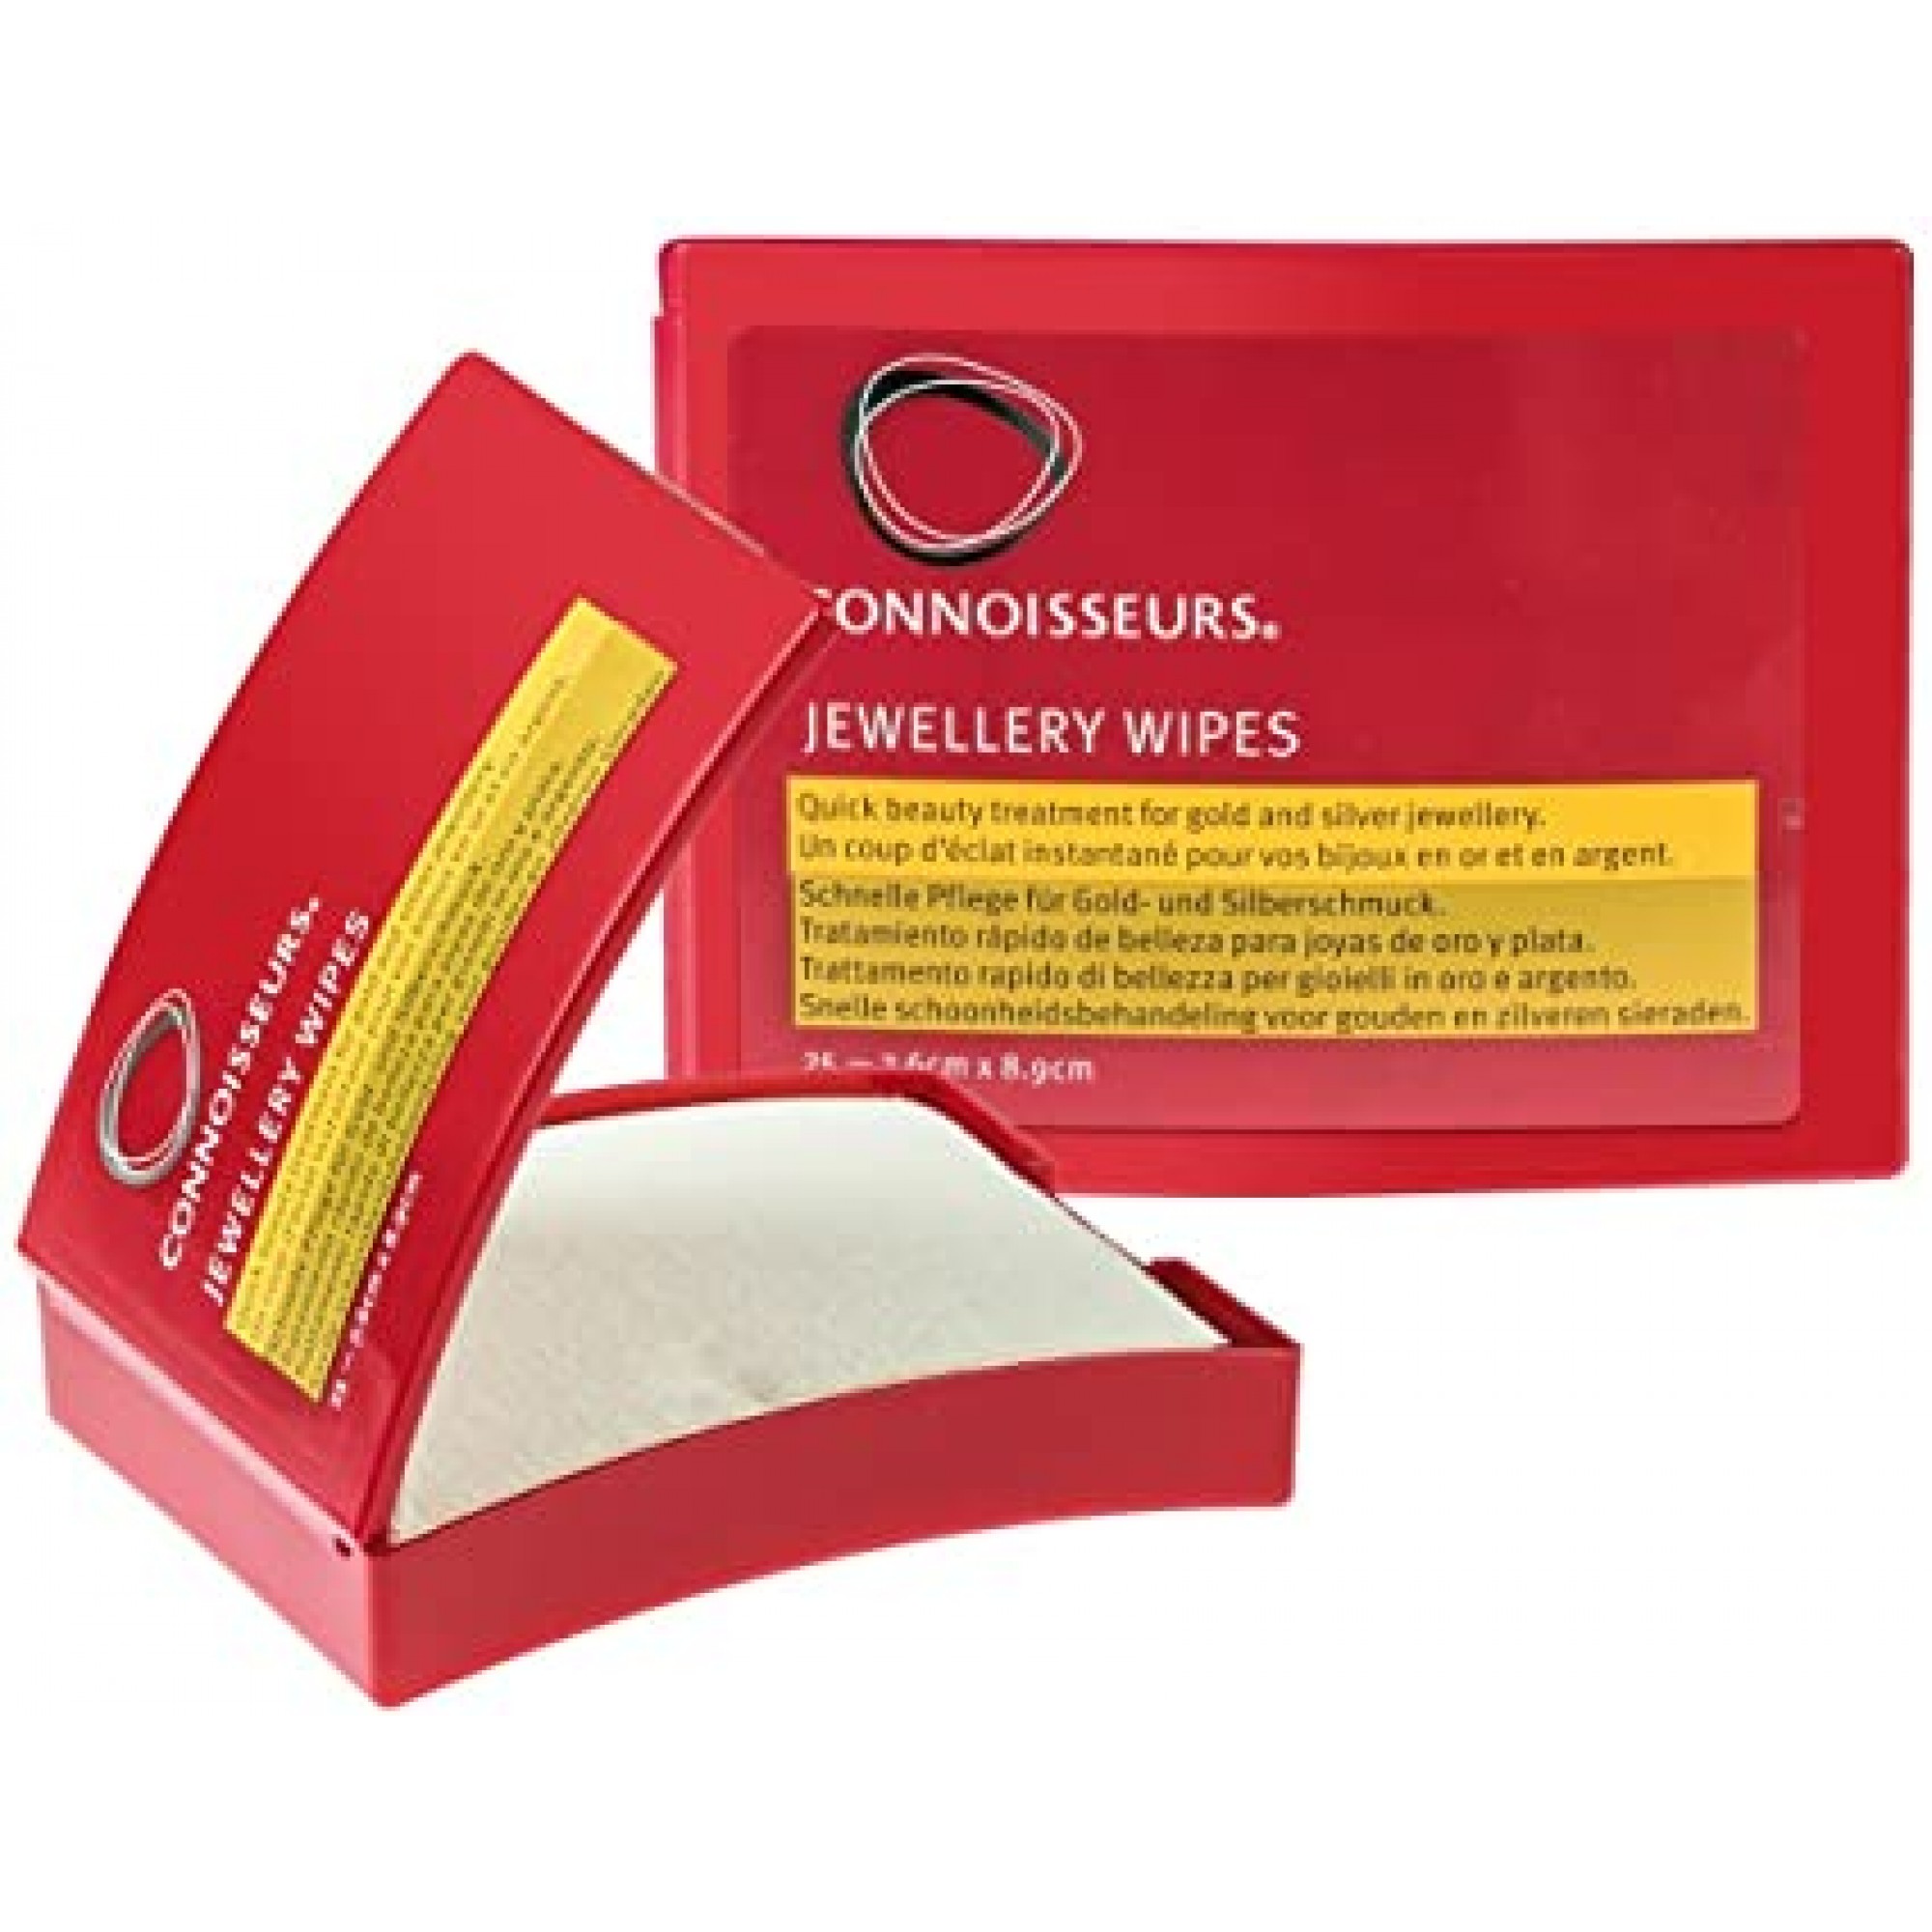 Connoisseurs Jewelry Wipes, 25 Tissues